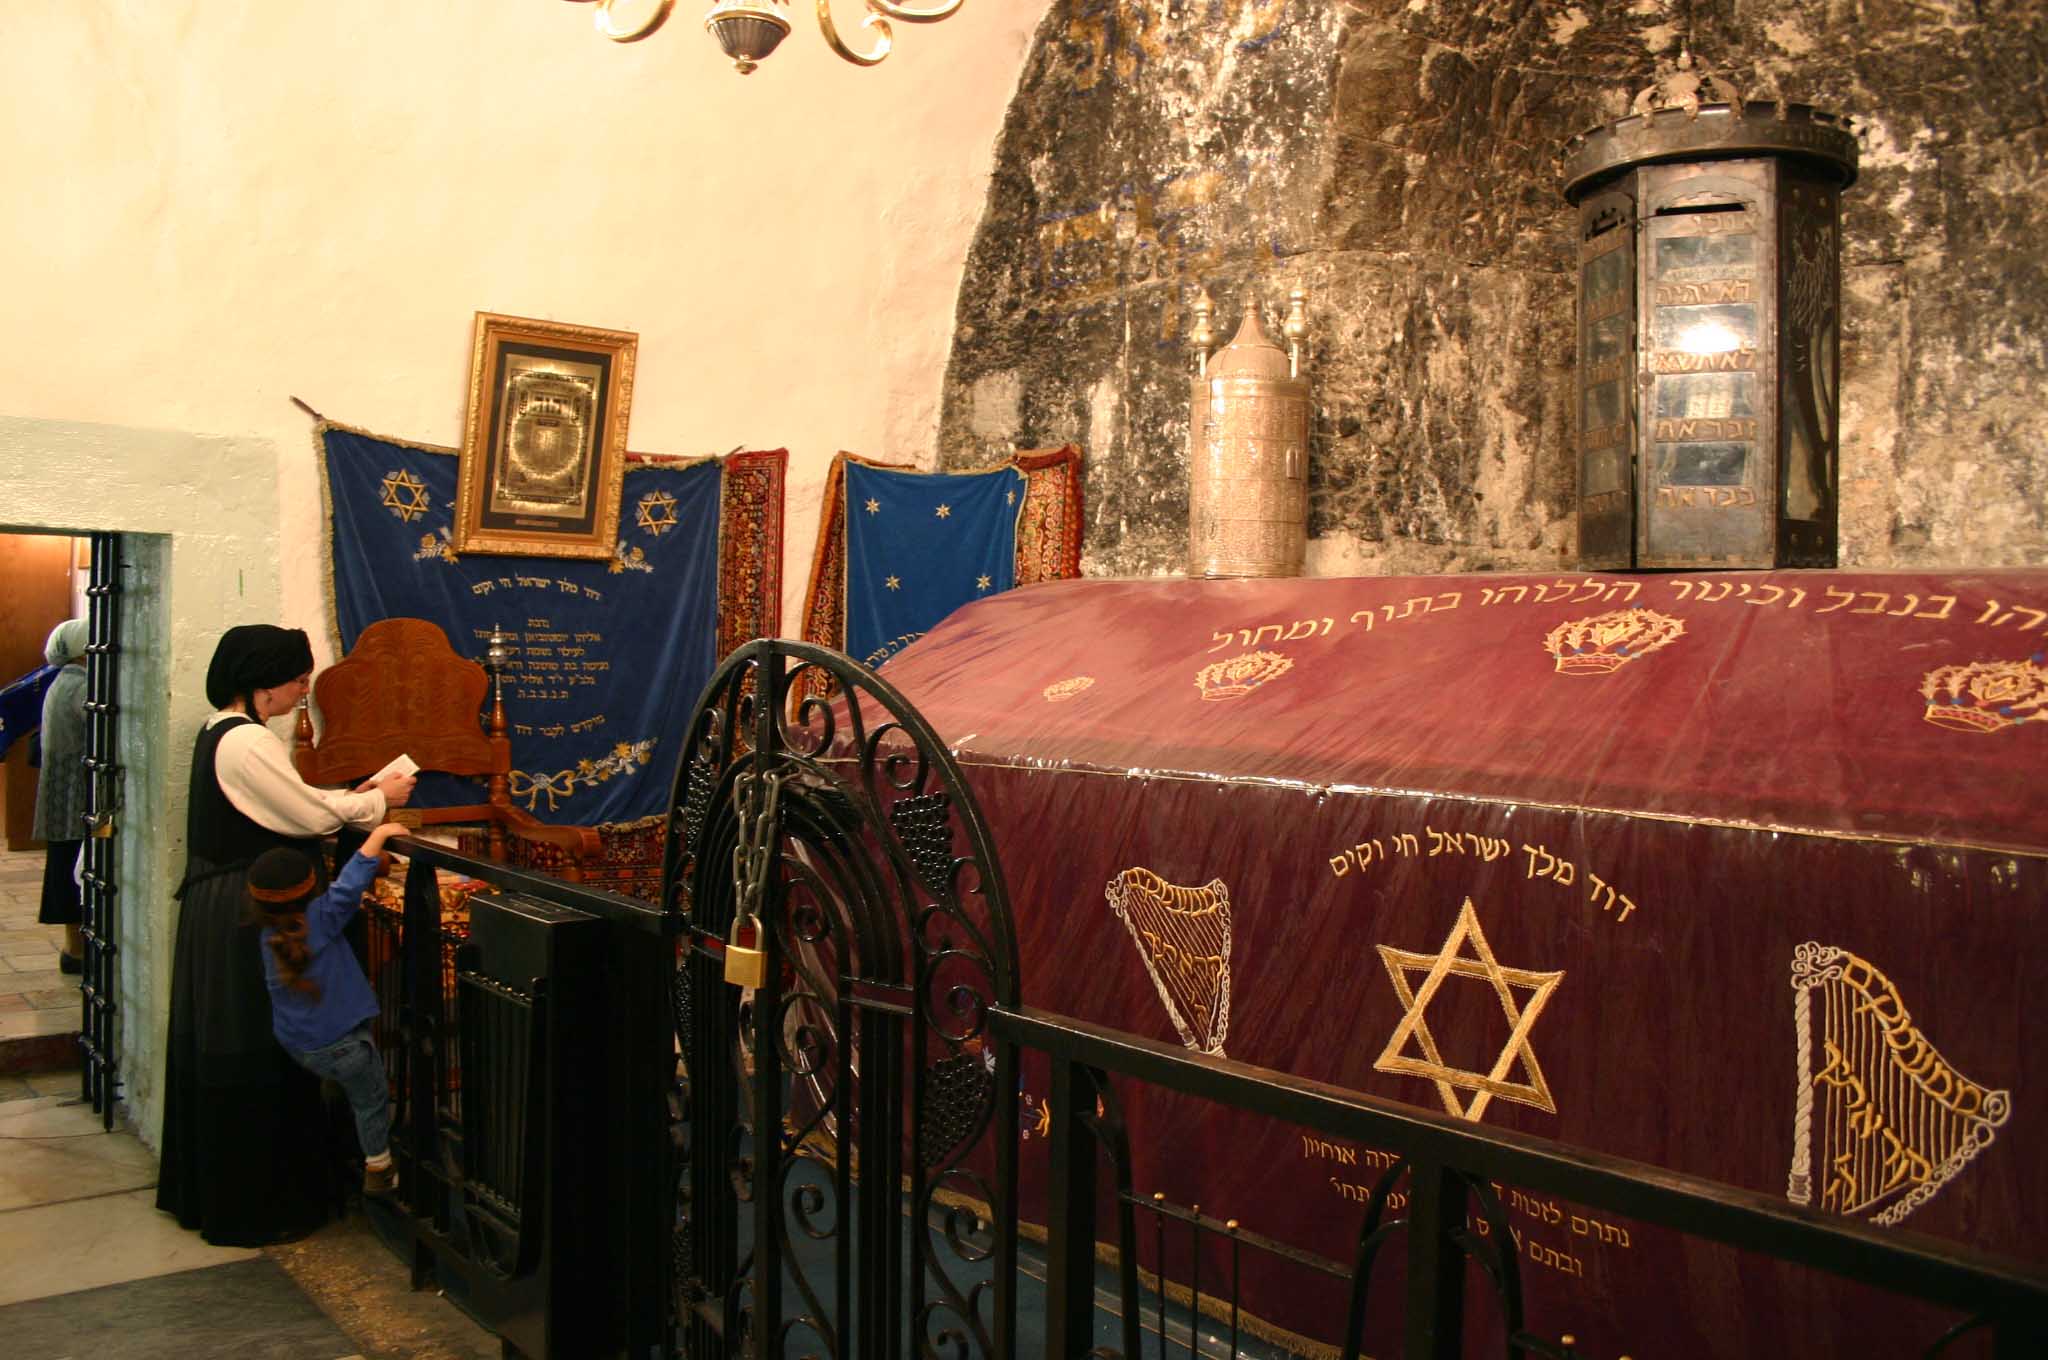 History, mystery, and occult converge in King David's fabled tomb